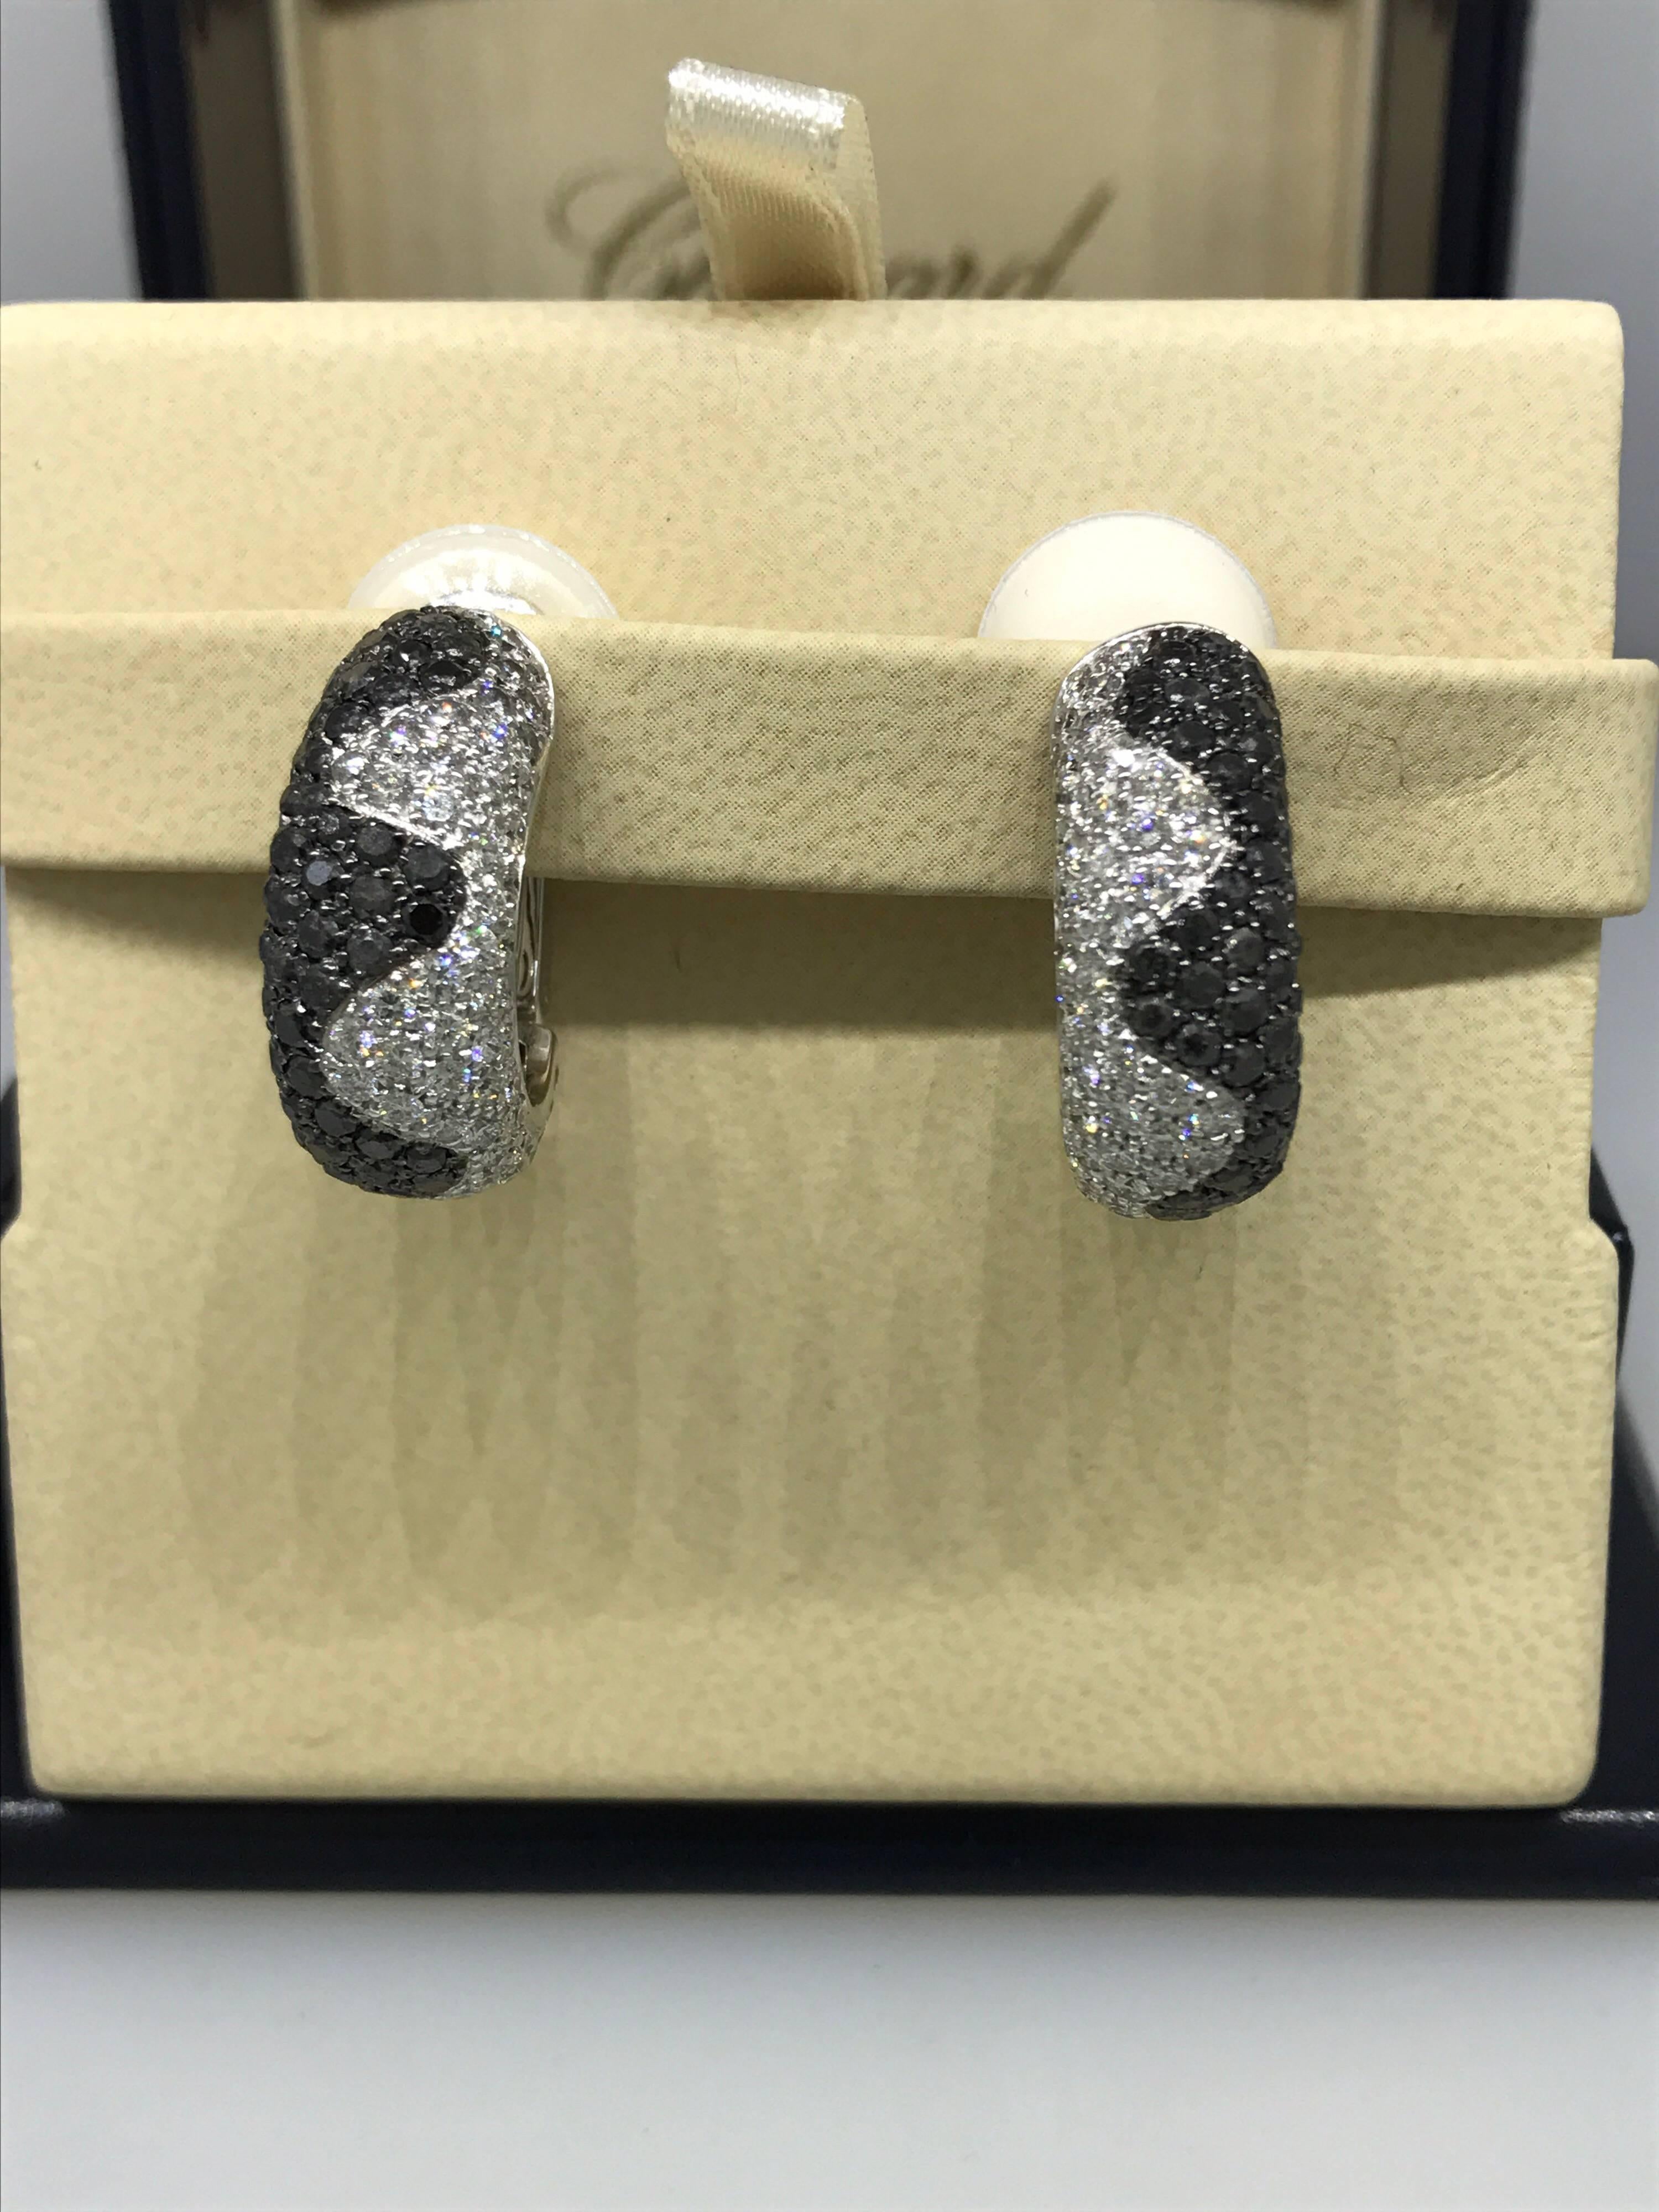 Chopard Women's Clip on Earrings

Model Number: 84/4102-1008

100% Authentic

Brand New

Comes with original Chopard box, certificate of authenticity and warranty, and jewels manual

18 Karat White Gold (13.20gr)

121 White Diamonds total on the